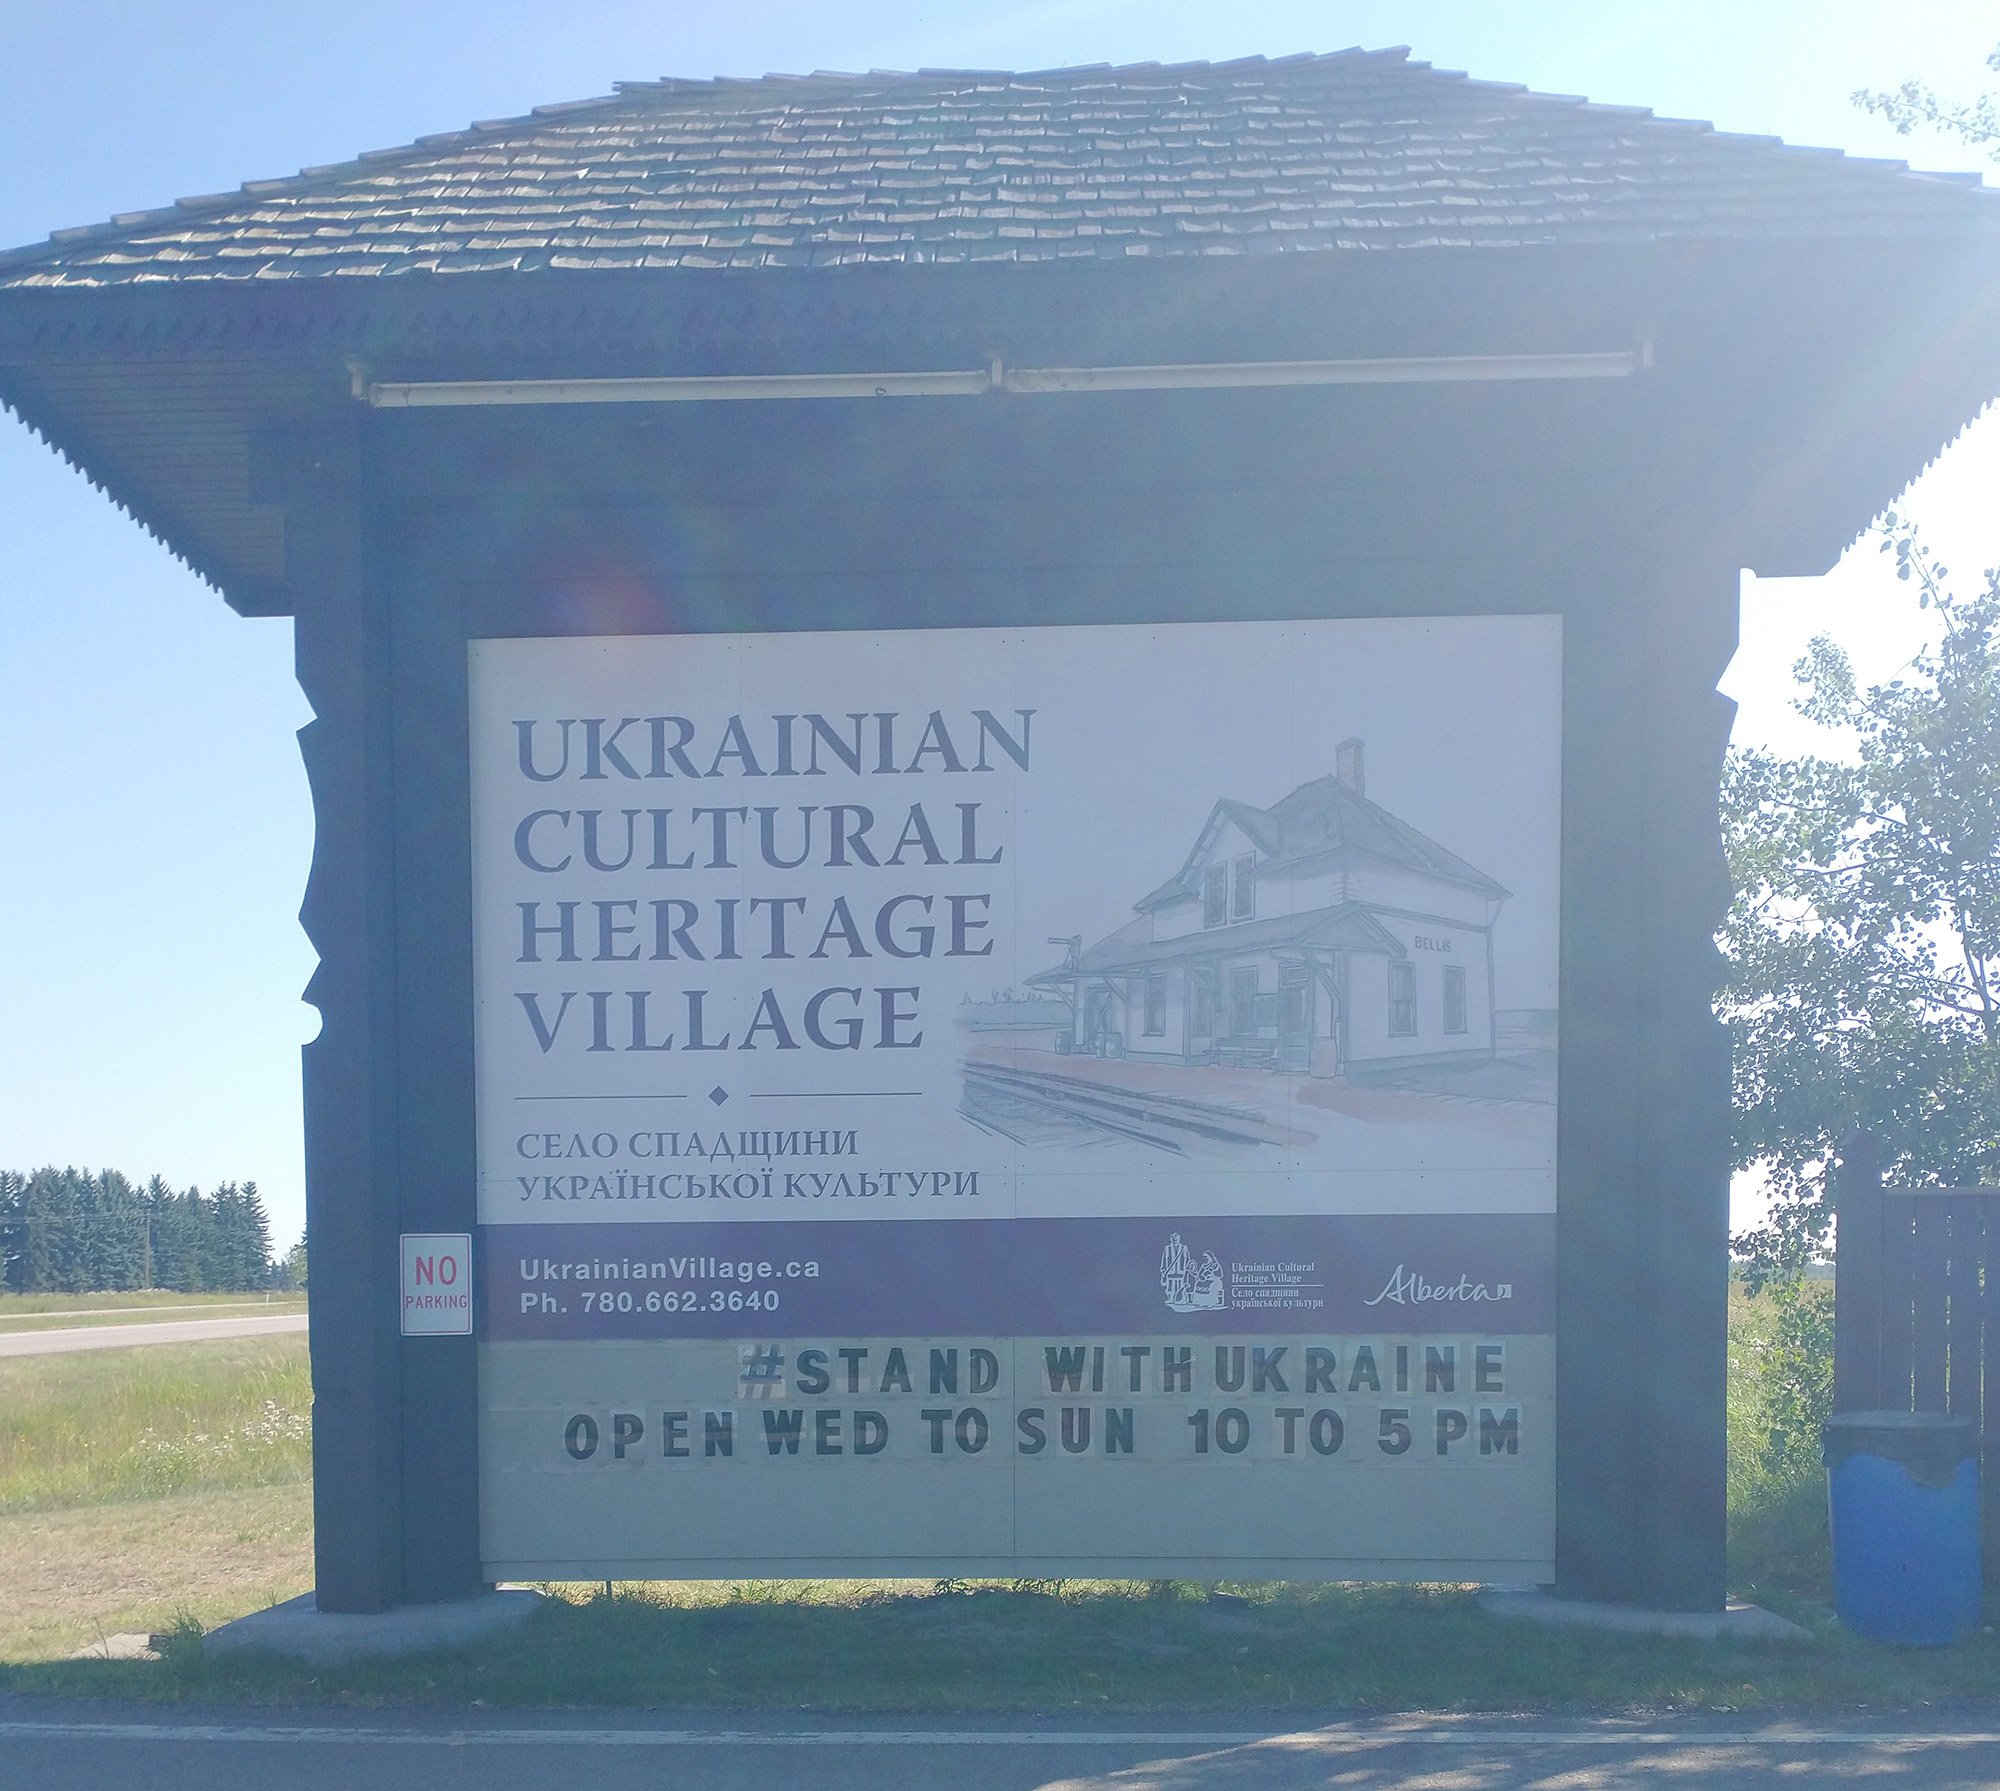 First went to this Ukrainian Historic village but the lady said bikes aren't allowed on site. I'll keep my 15$ I guess.